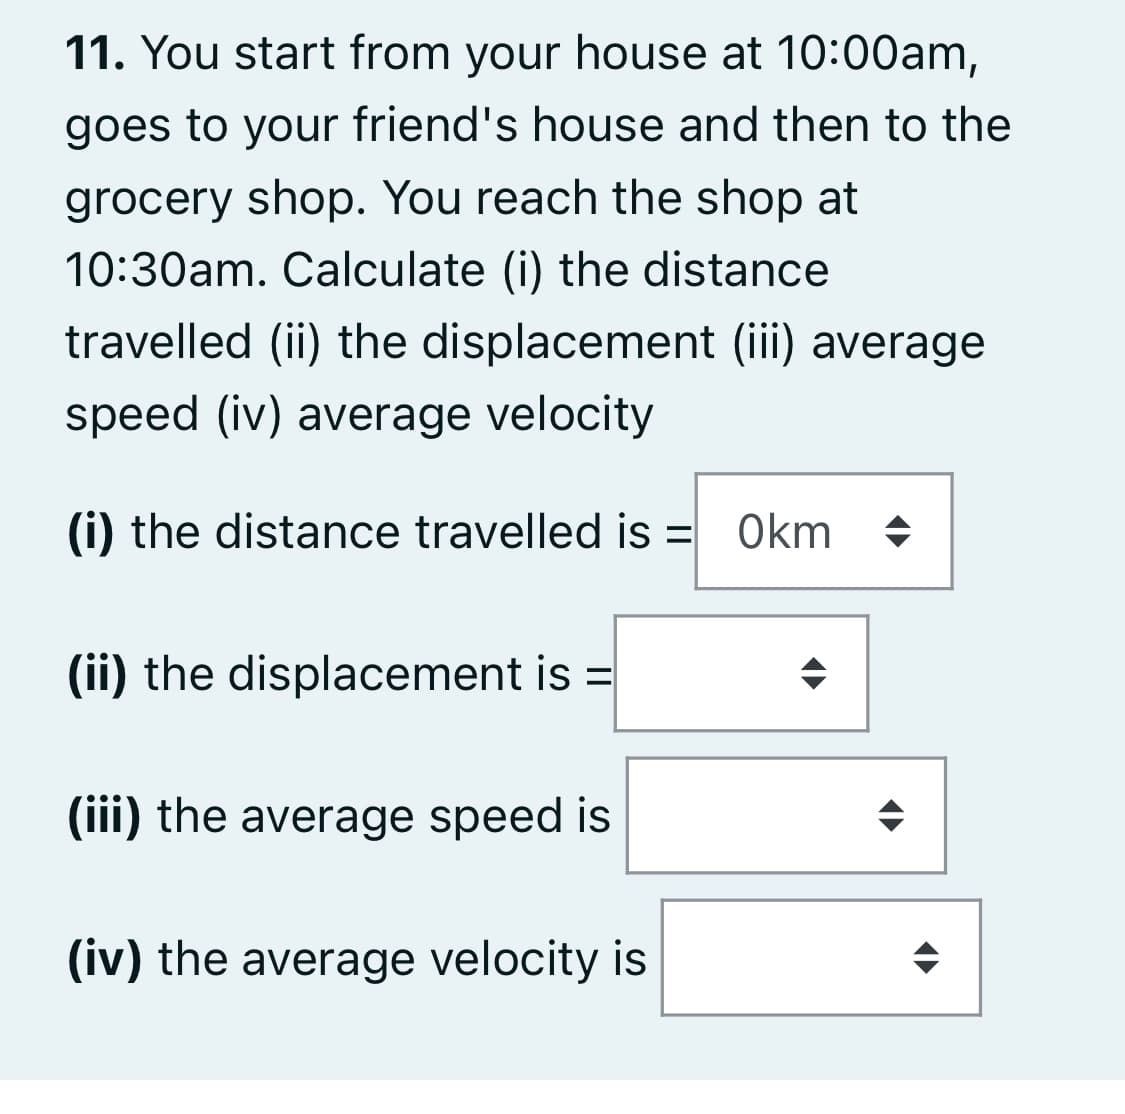 11. You start from your house at 10:00am,
goes to your friend's house and then to the
grocery shop. You reach the shop at
10:30am. Calculate (i) the distance
travelled (ii) the displacement (iii) average
speed (iv) average velocity
(i) the distance travelled is = Okm
(ii) the displacement is =
(iii) the average speed is
(iv) the average velocity is
